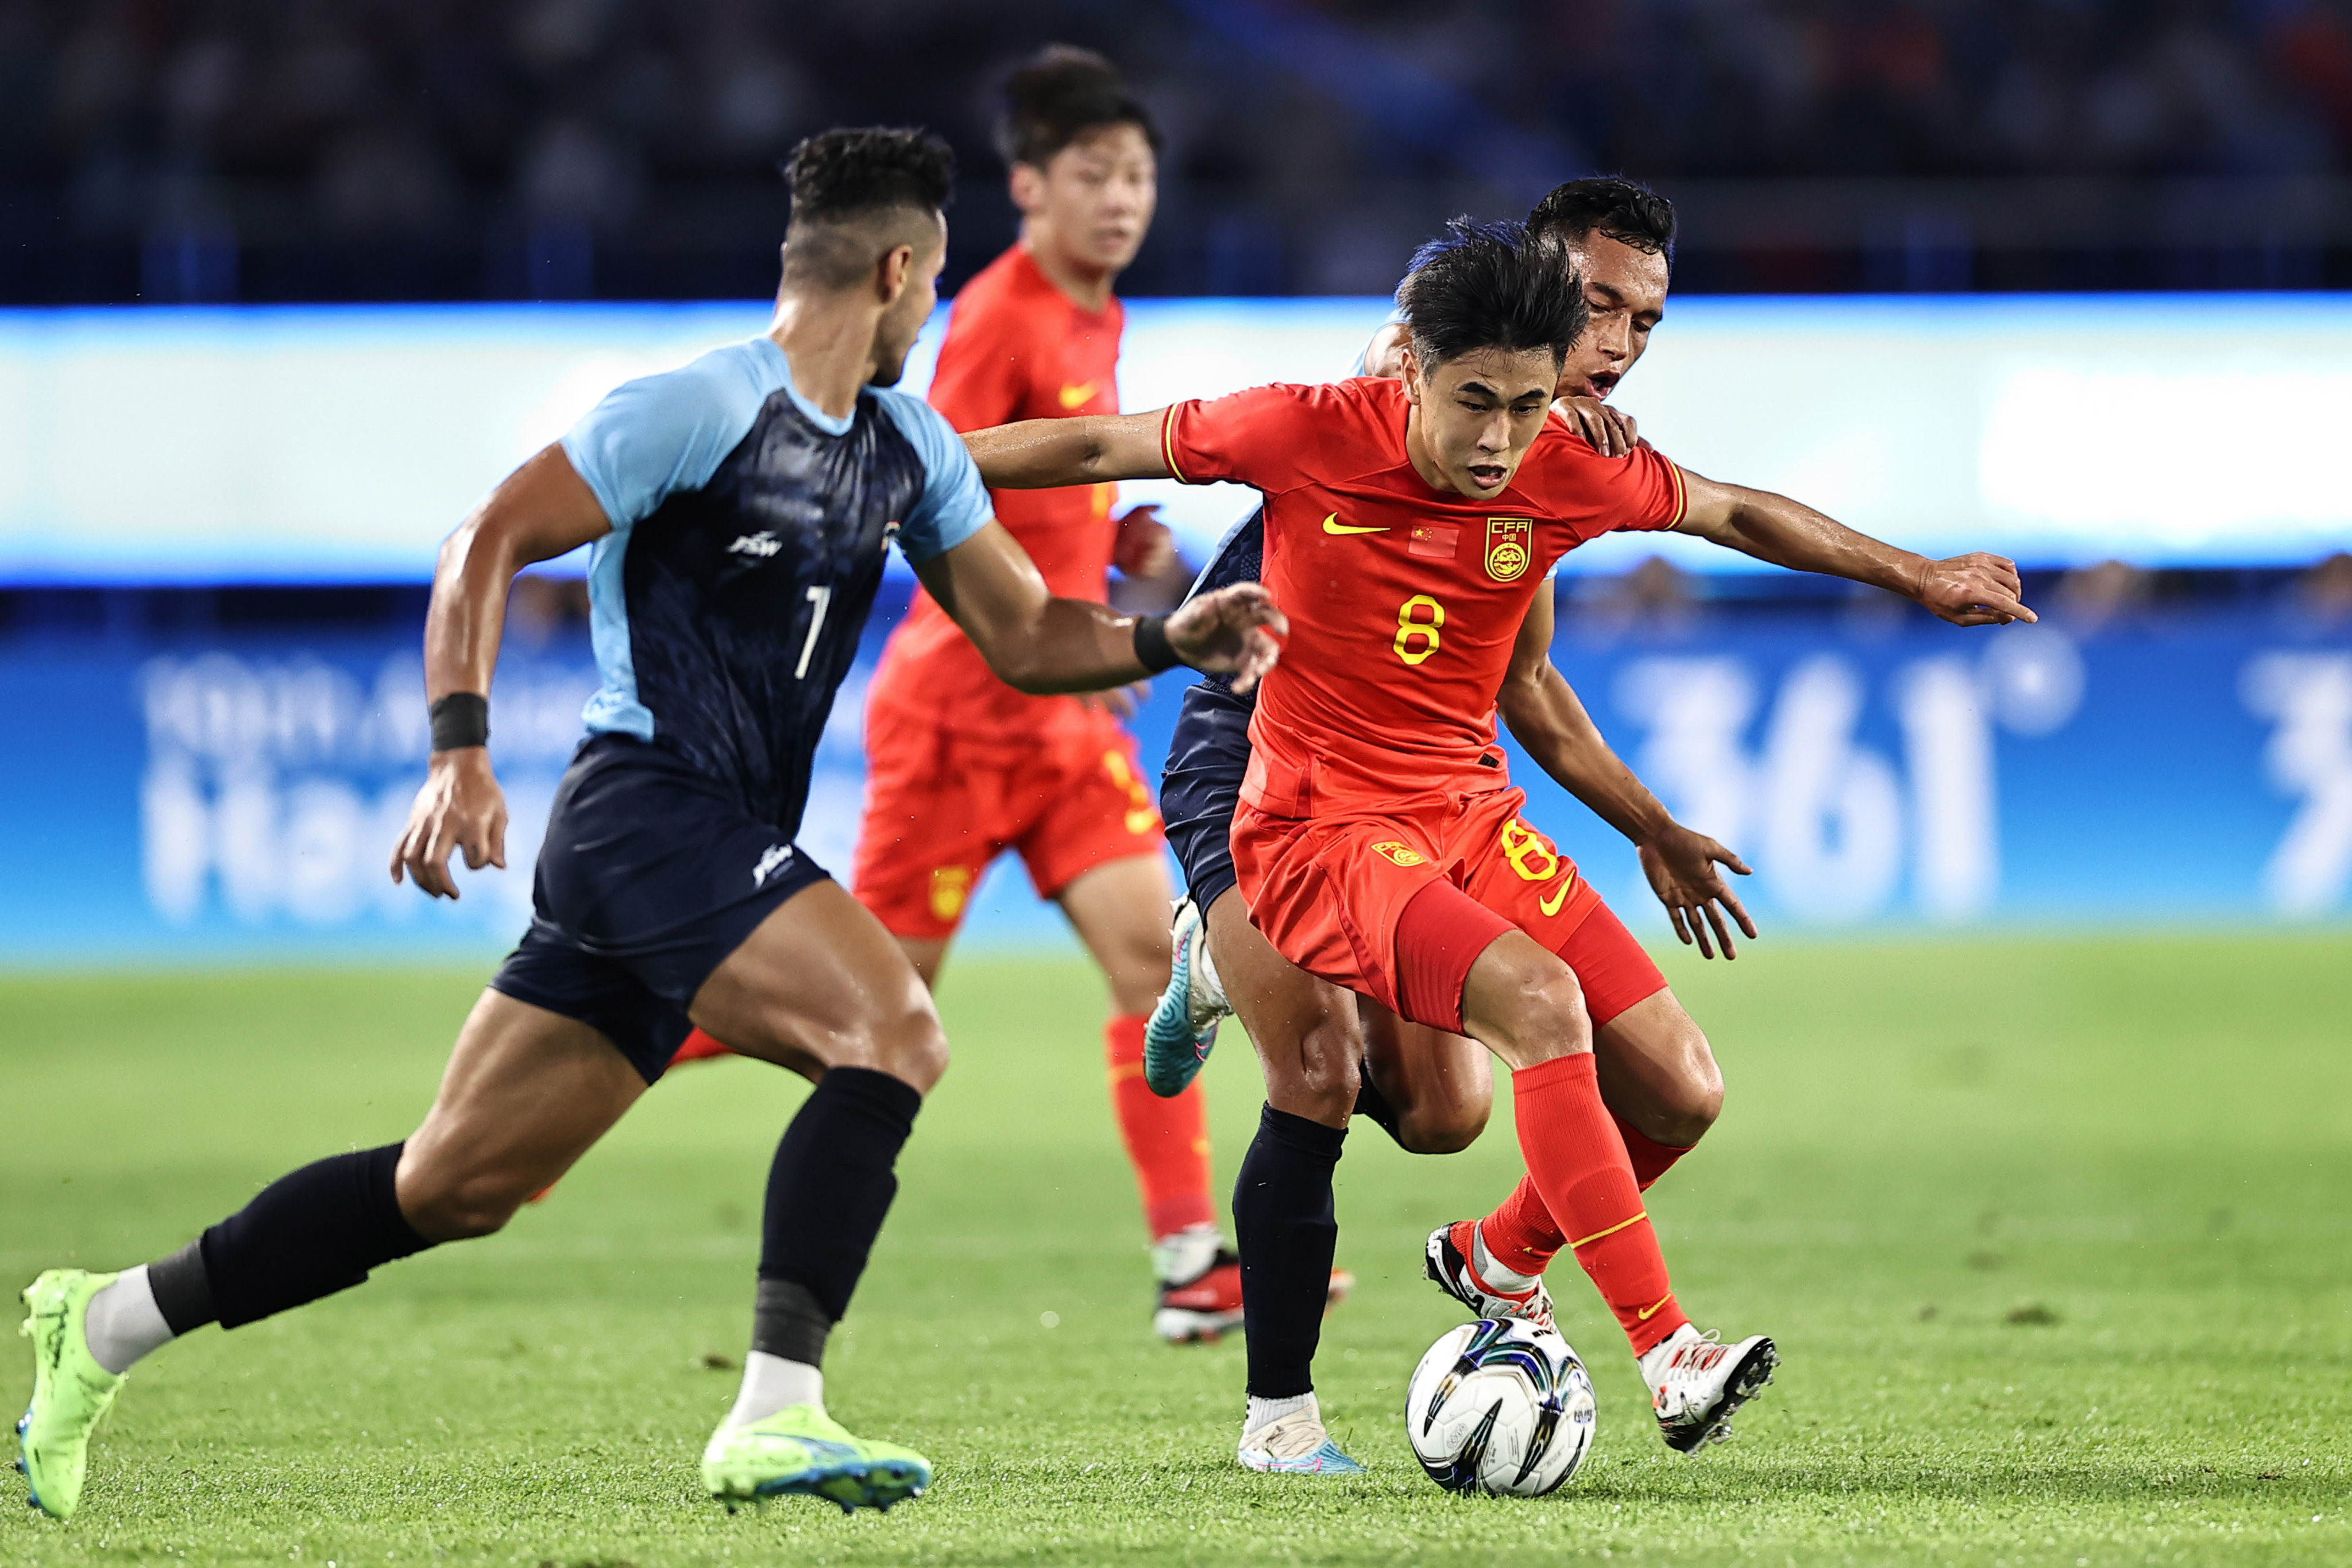 China’s Dai Wai-tsun drives through the India defence during his side’s Asian Games match at Huanglong Sports Centre Stadium. Photo: Getty Images